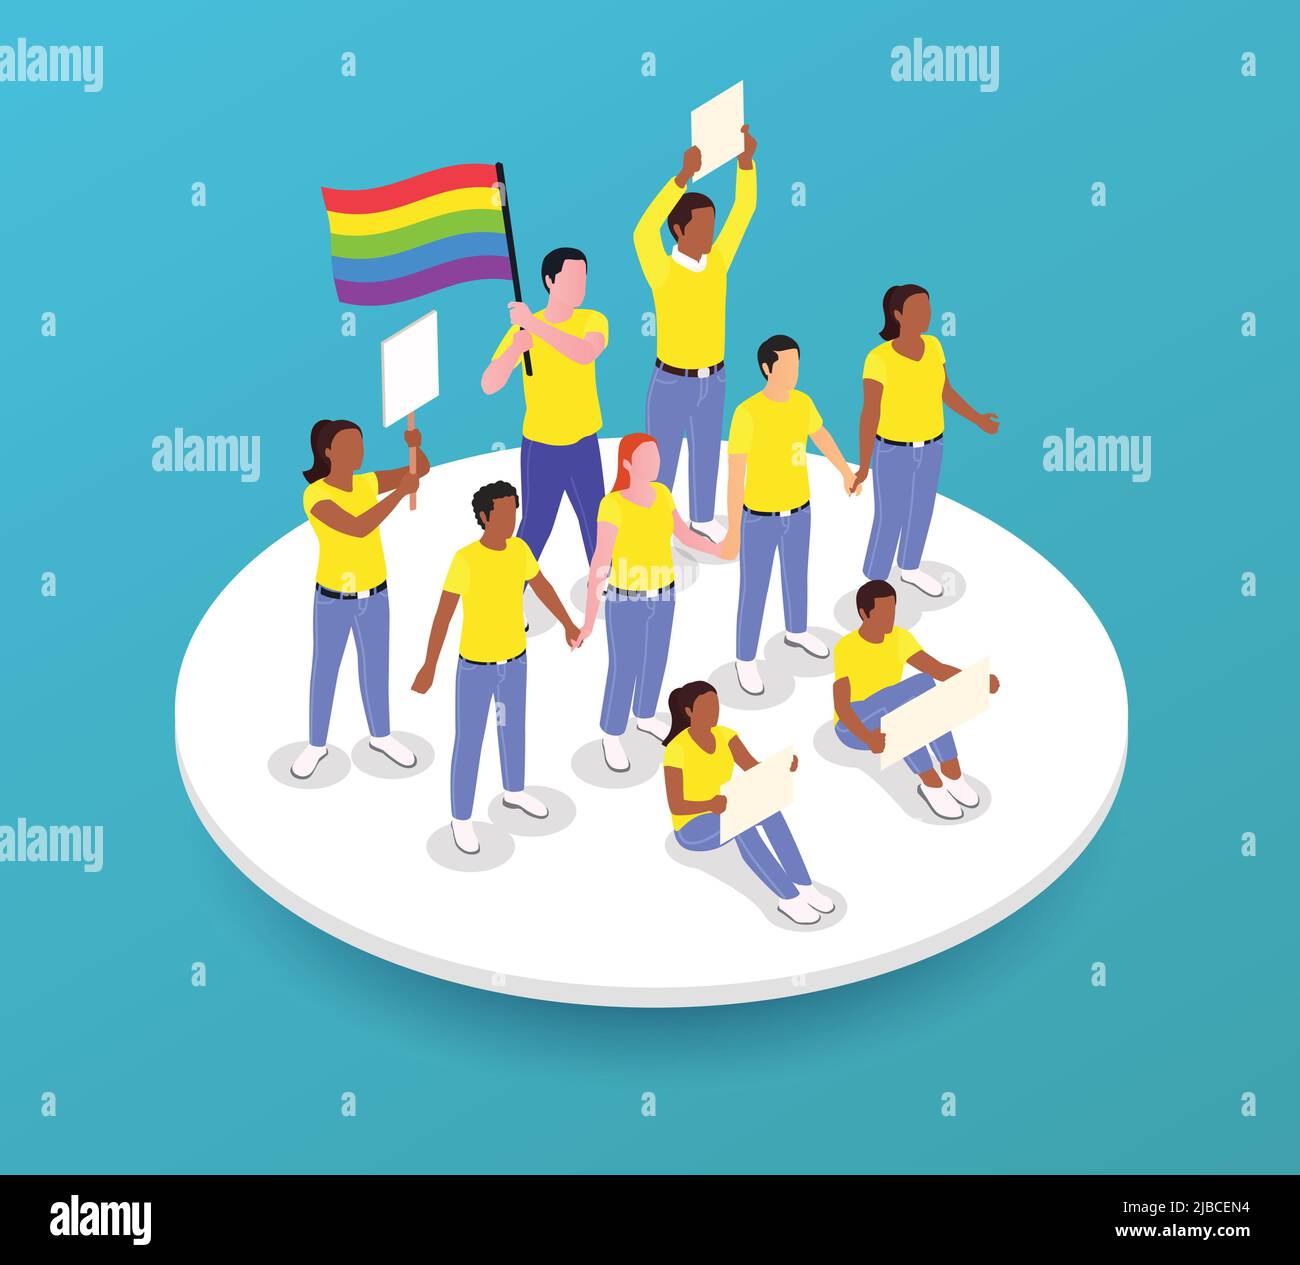 Public protest demonstration isometric composition with round platform and group of rioters with placards lgbt flag vector illustration Stock Vector